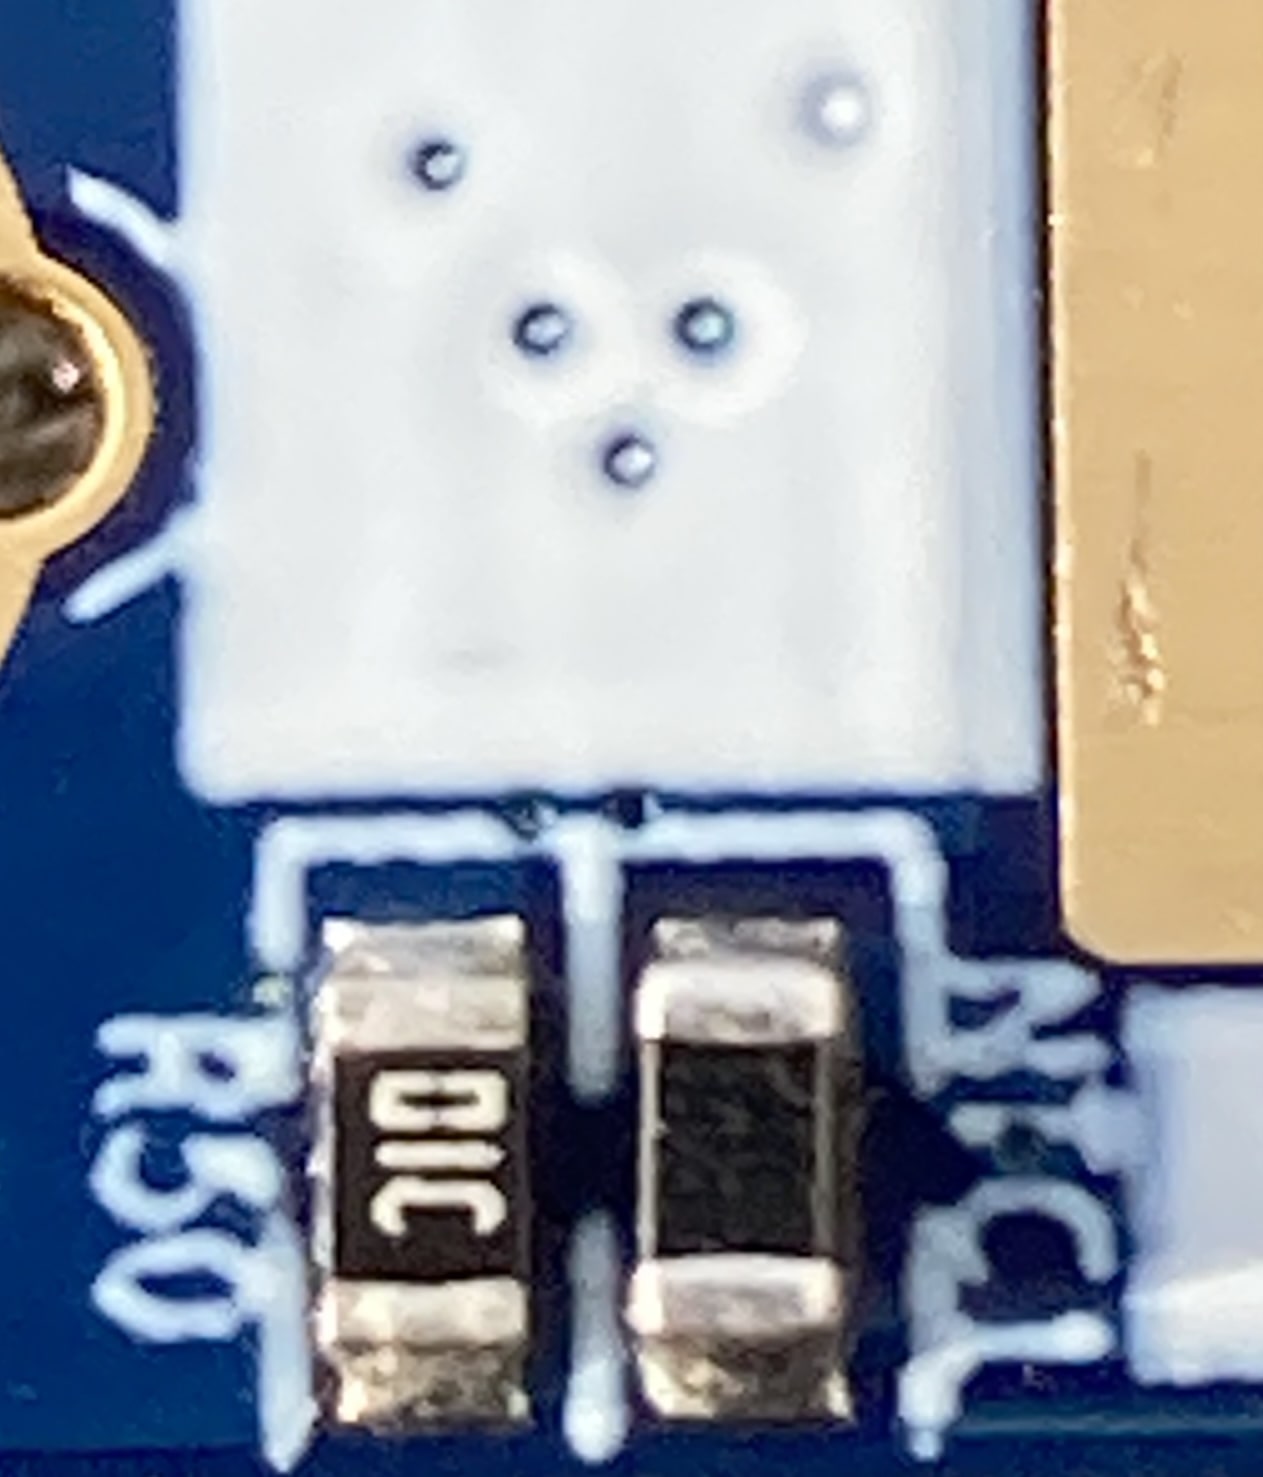 Kapton tape/protect the NTC sensor on opposite side of V2 (V1 does not have this)